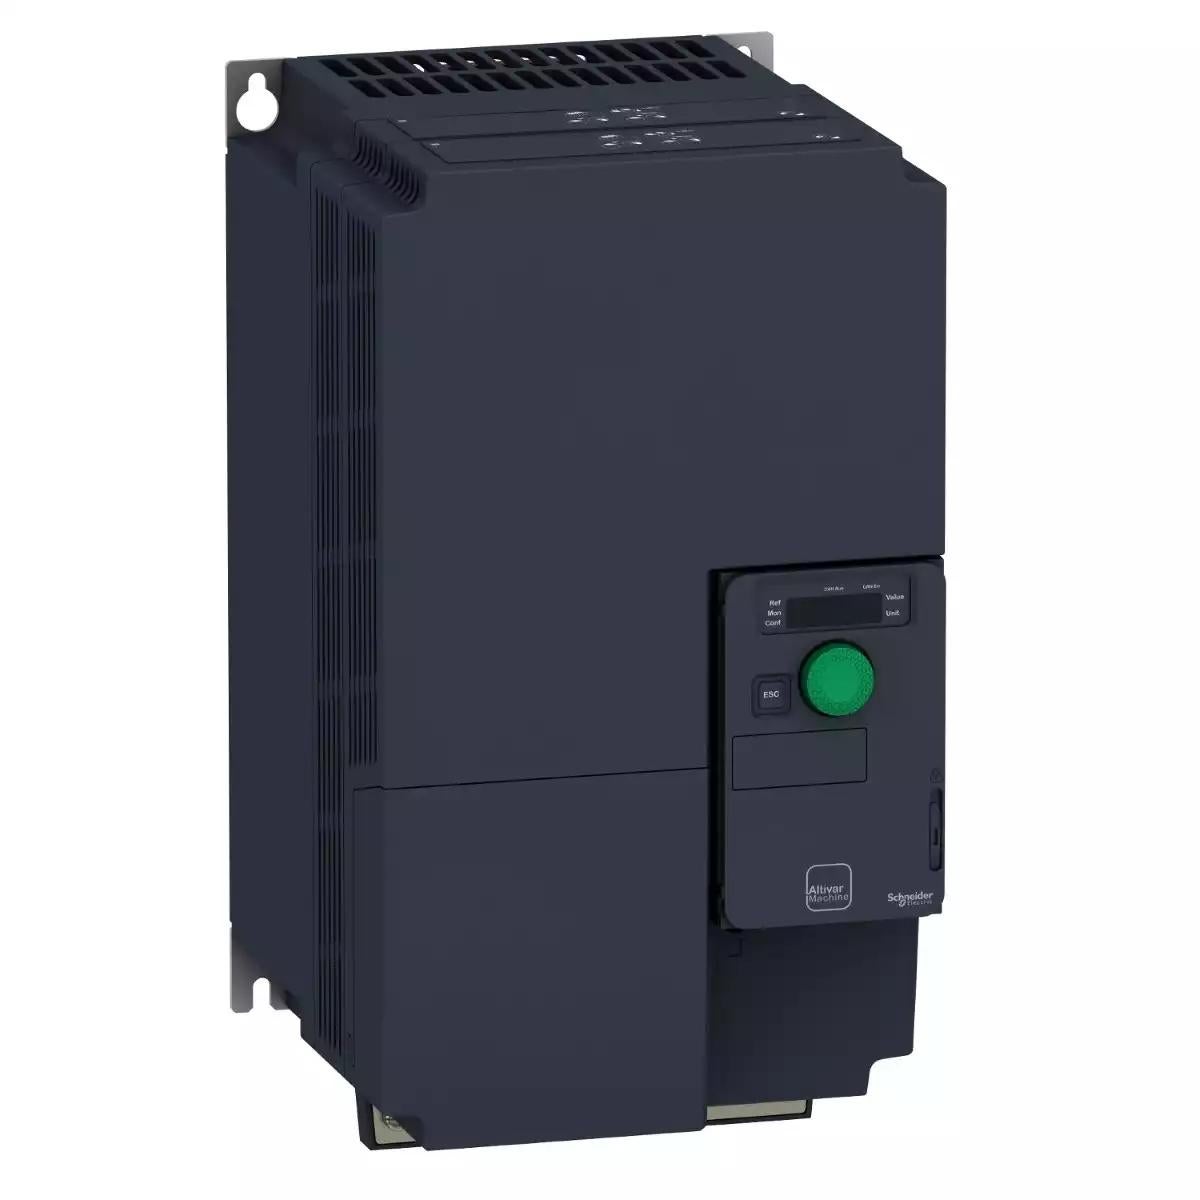 variable speed drive, Altivar Machine ATV320, 15kW, 200 to 240V, 3 phases, compact